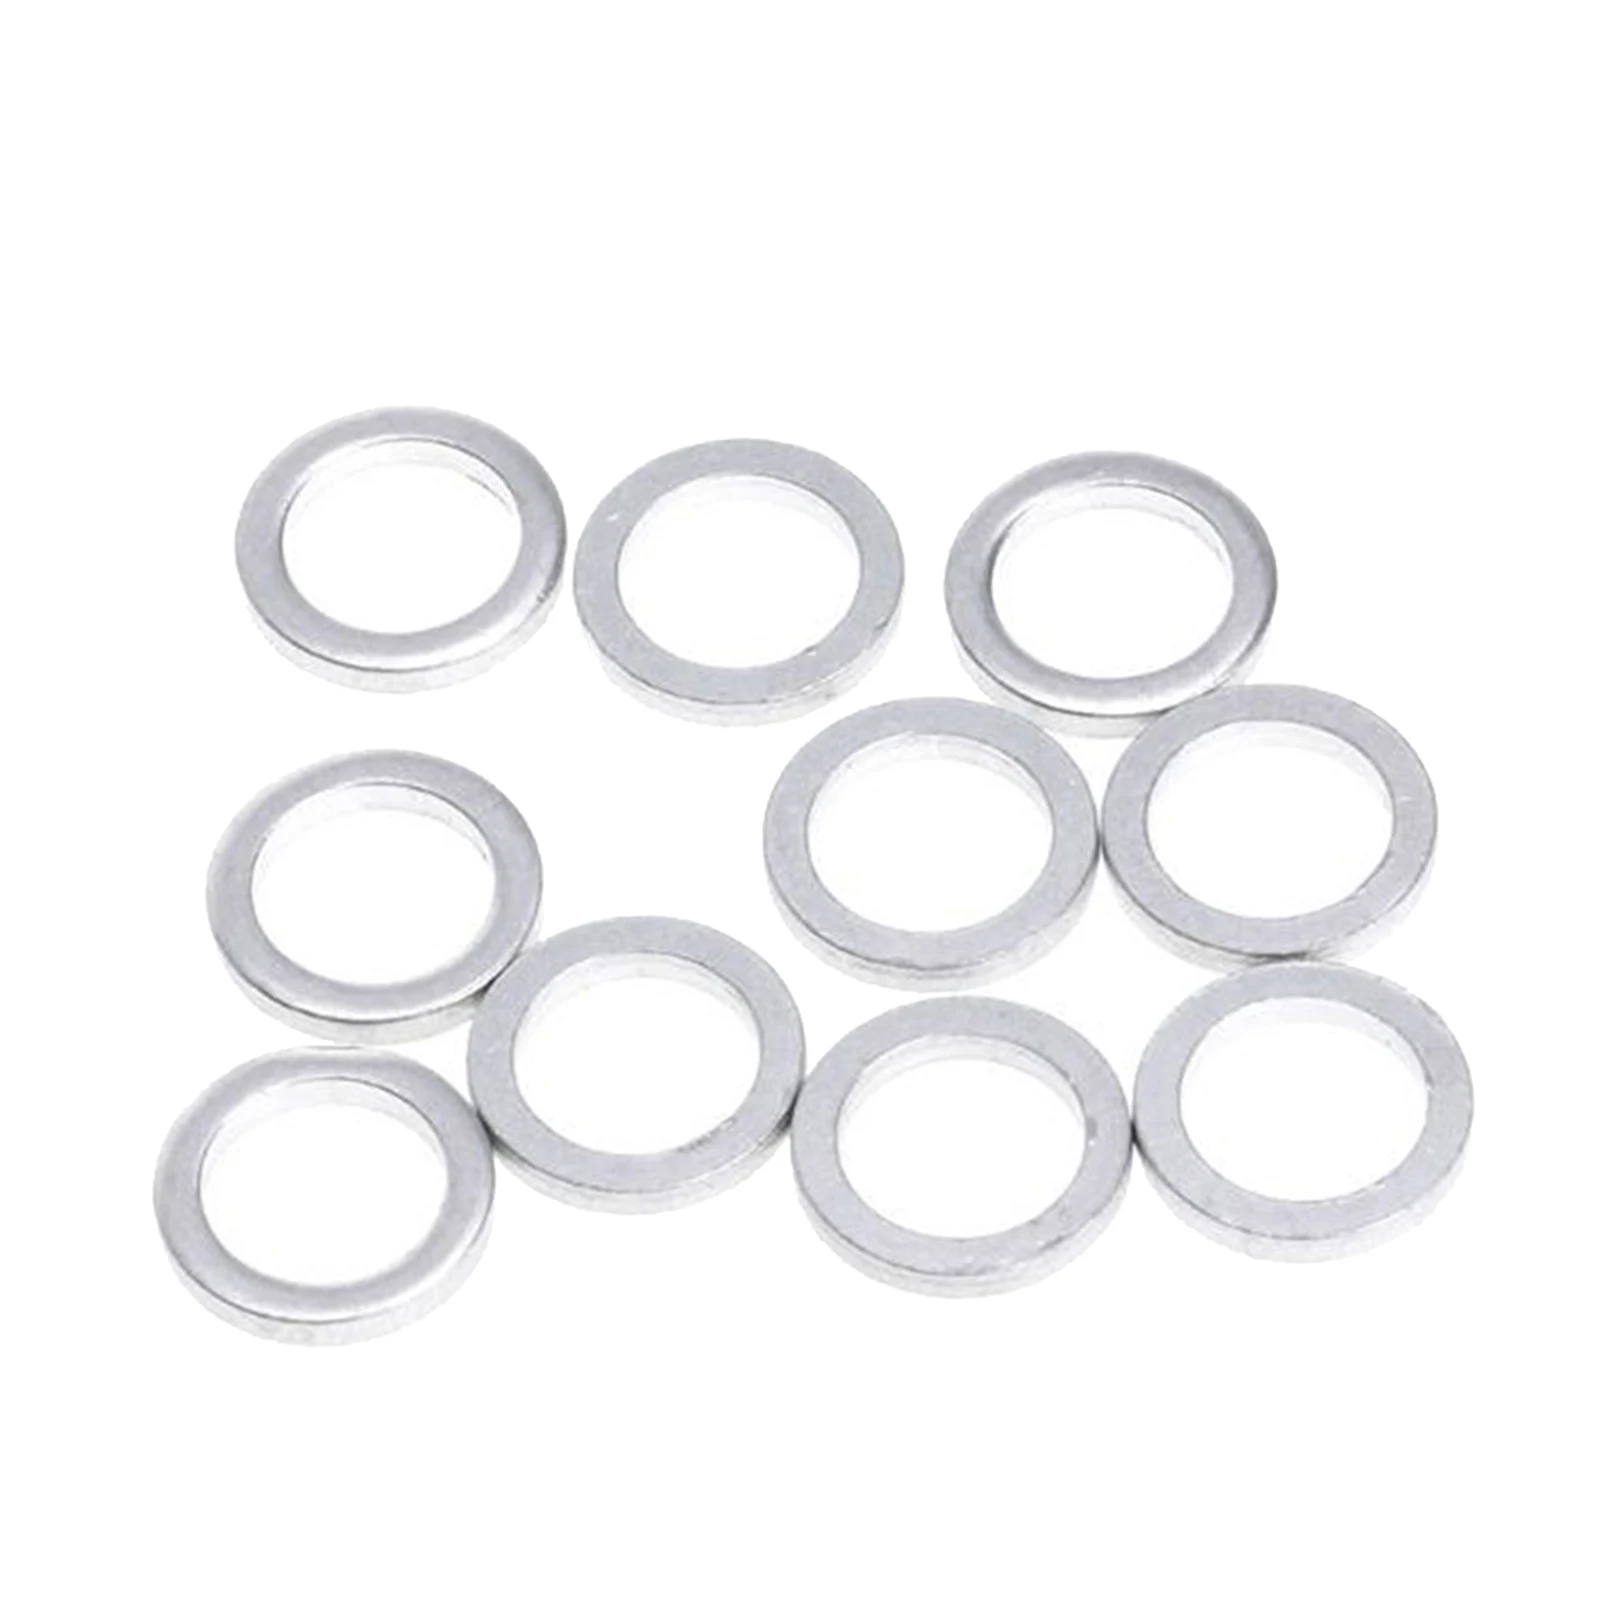 10PCS Bike Chain Wheel Screws Washer Gasket 1mm Thick Cycling Double Change Single Crankset Screws Bolt Washer Ring Part